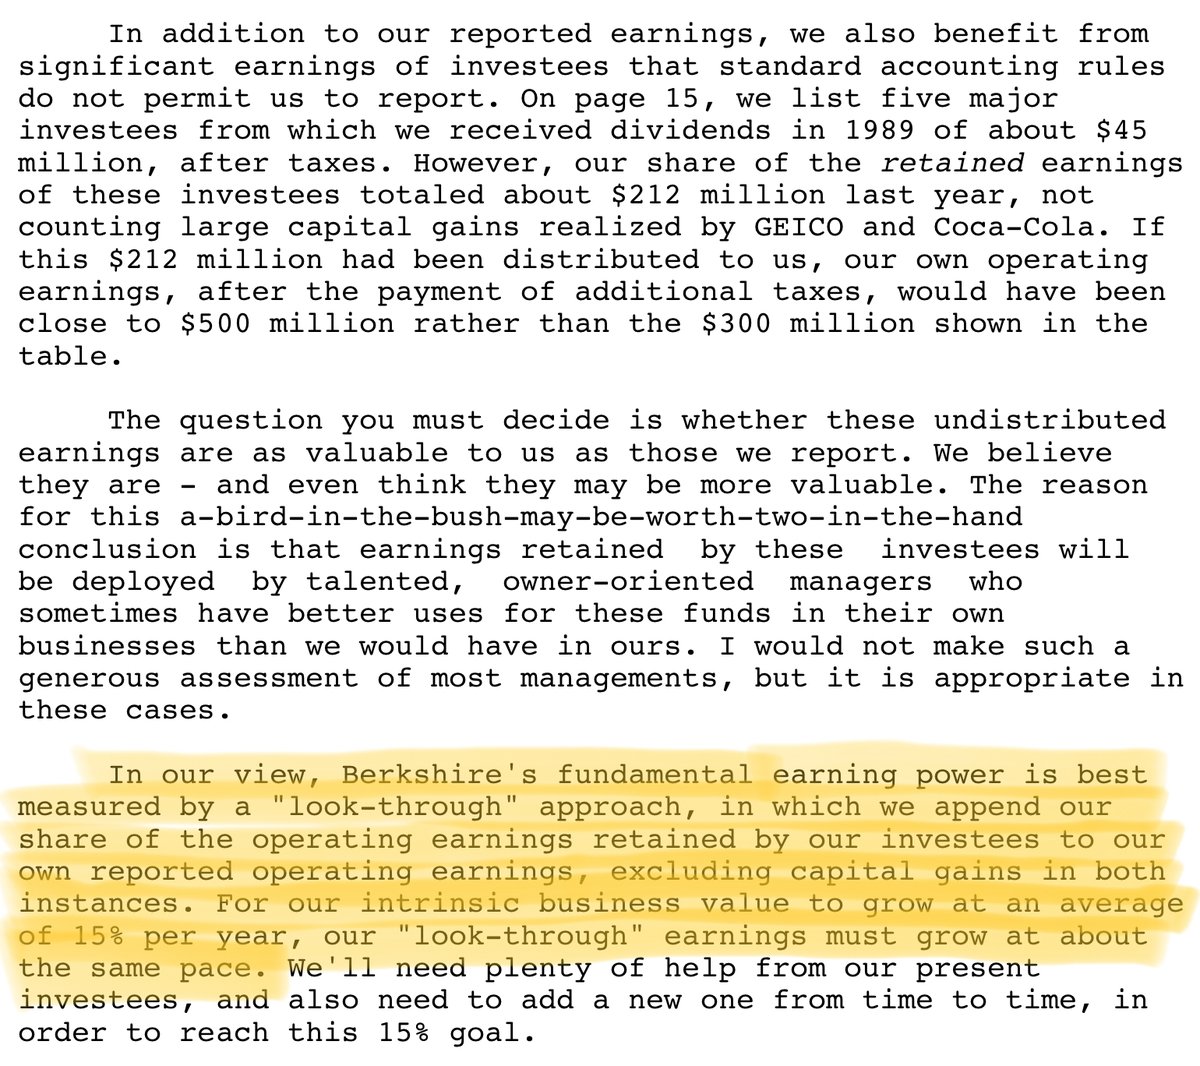 16/Buffett likes LTE a lot. He uses it as a yardstick for Berkshire's own portfolio.In his shareholder letters, there are only a few topics he revisits again and again -- year after year.Insurance float is one such topic. LTE is another.For example, his 1989 letter says: